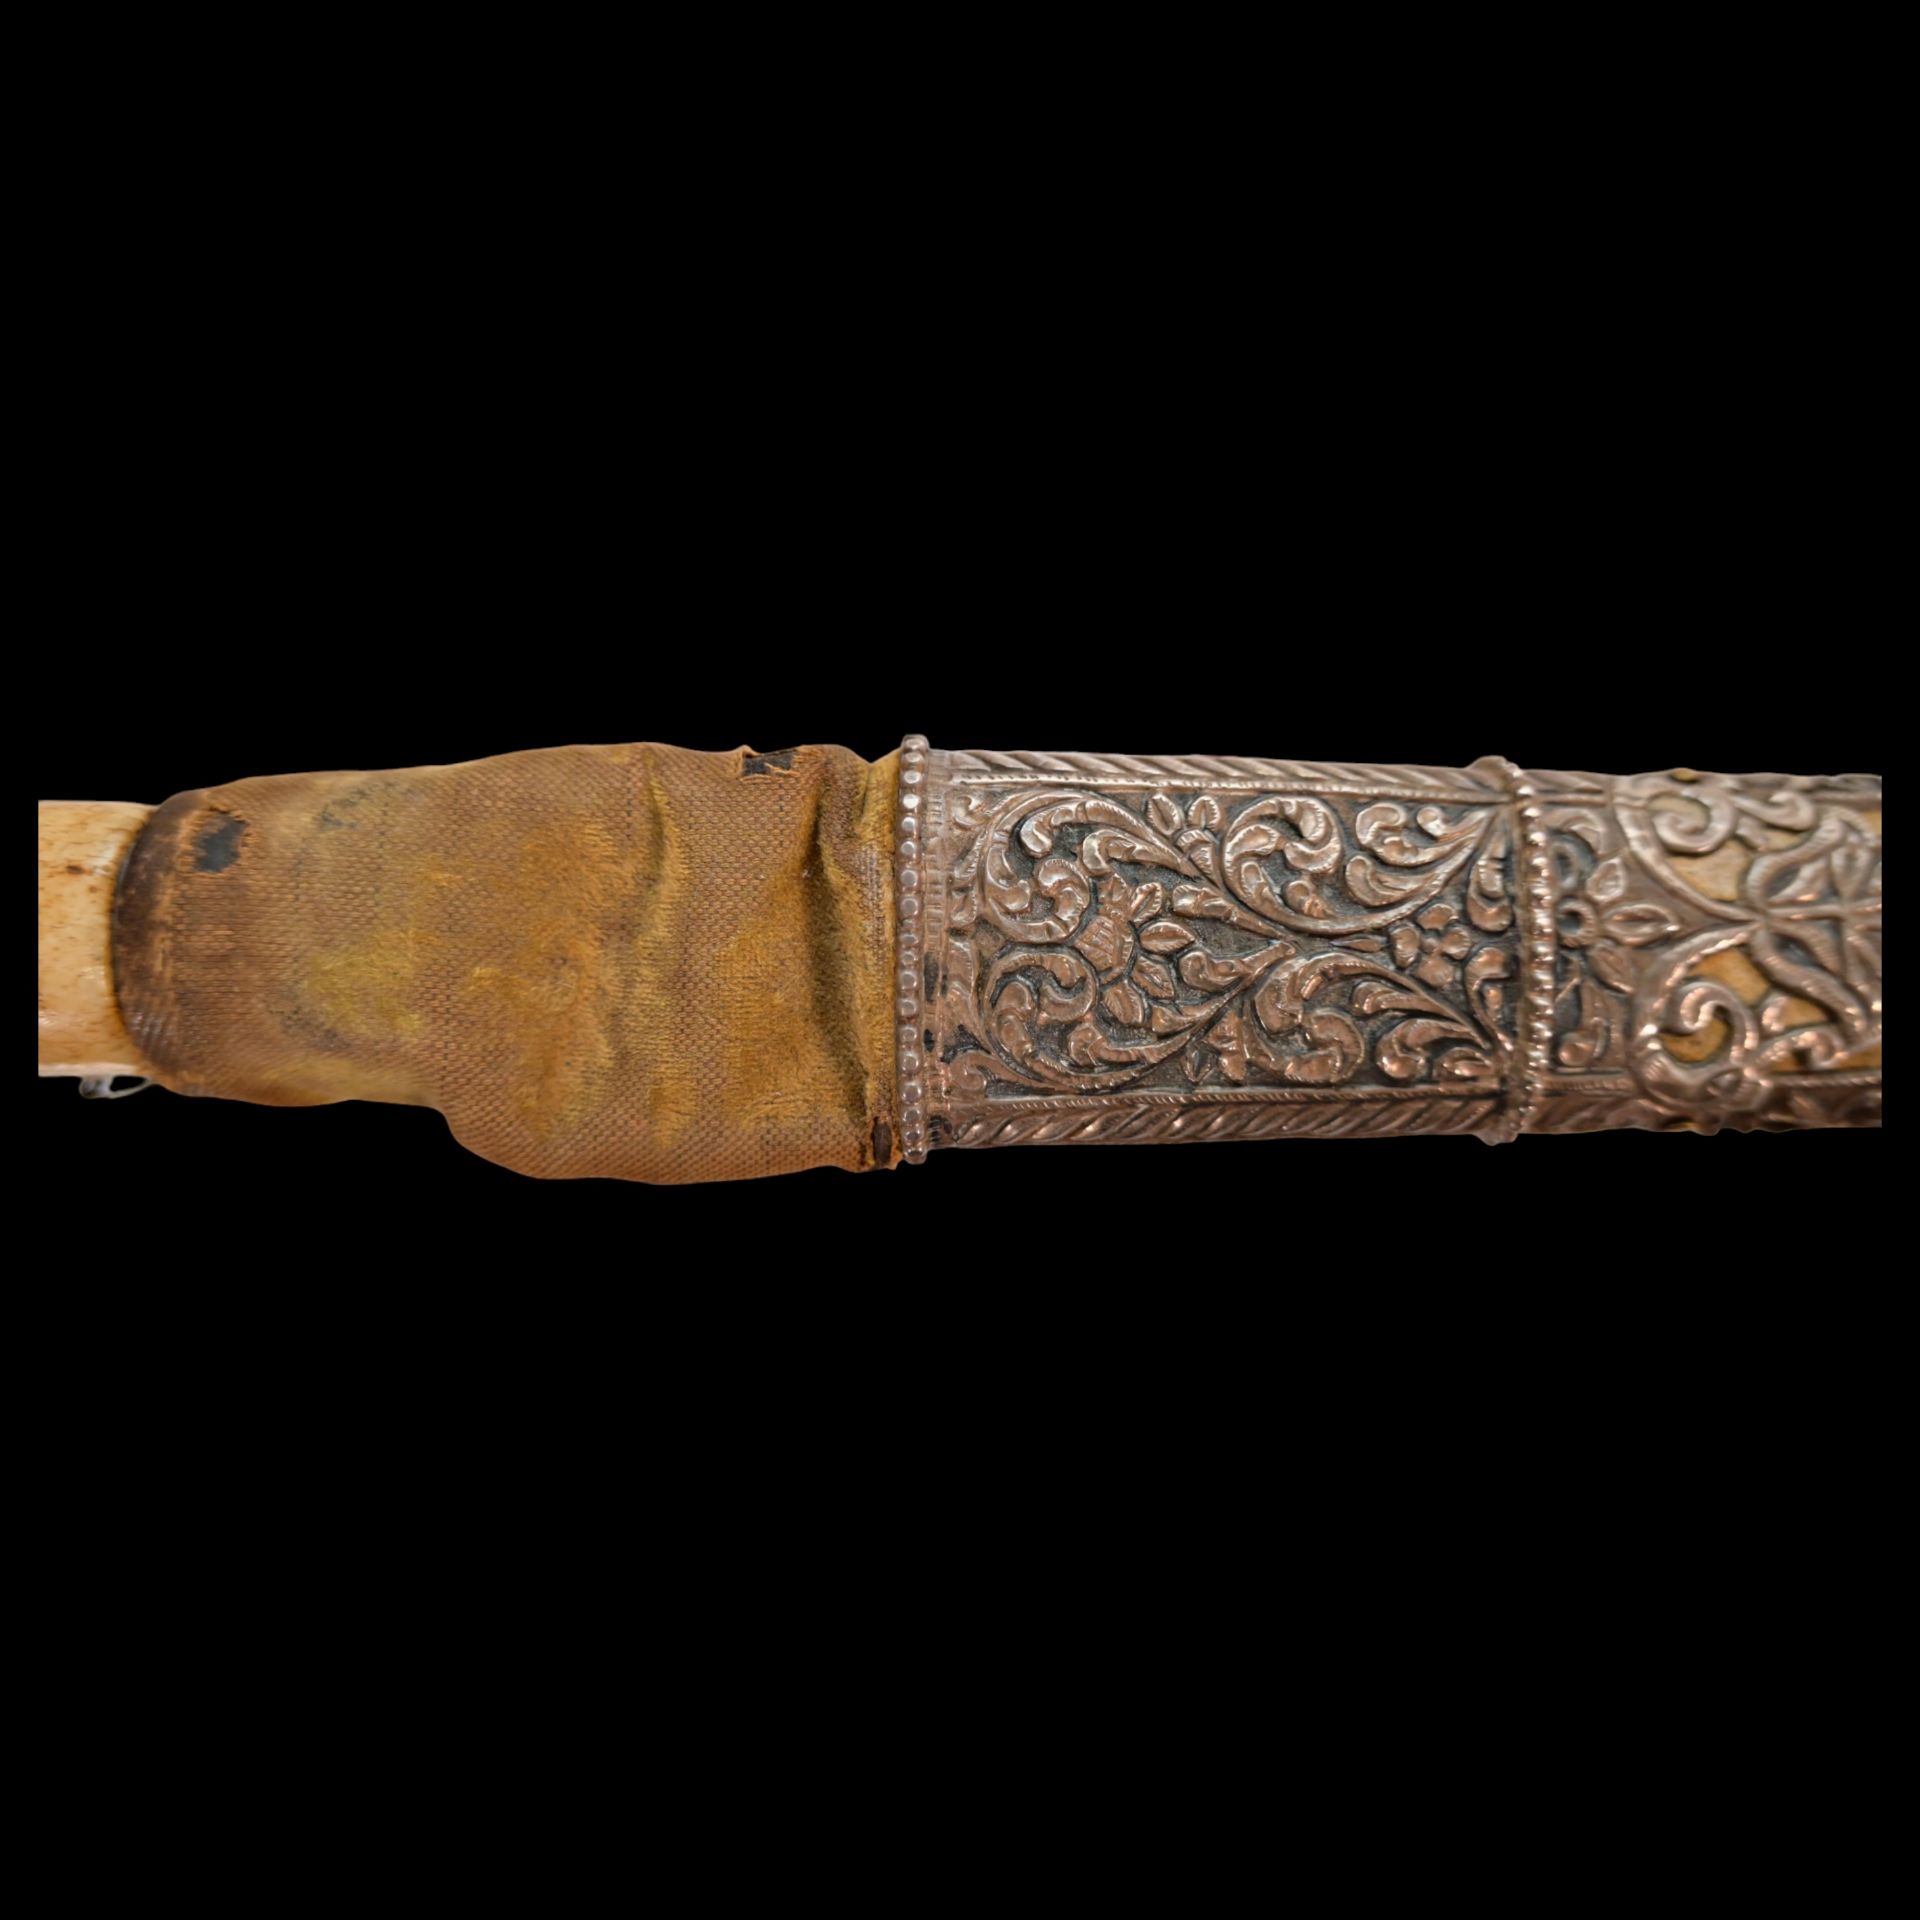 A PERSIAN ZAND DYNASTY KARD DAGGER WITH WOOTZ BLADE AND GOLD INLAY. - Image 15 of 27